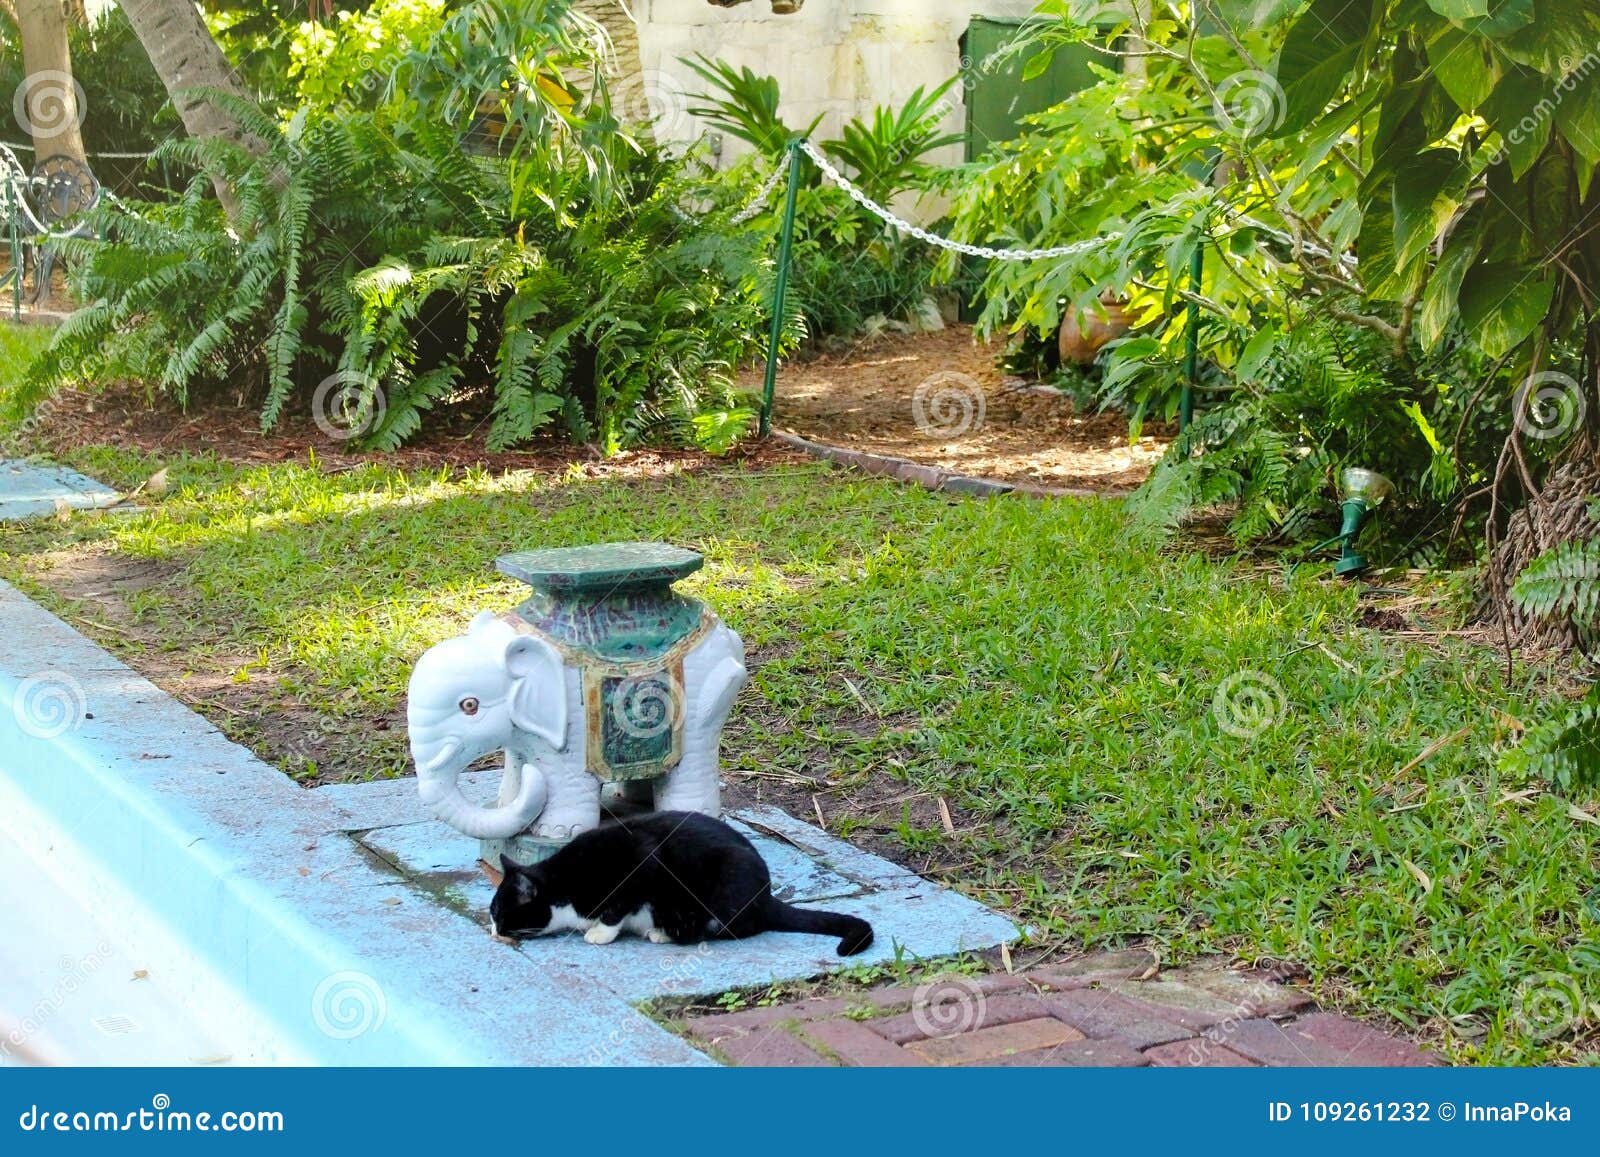 black polydactyl cat in the ernest hemingway home and museum in key west, florida.